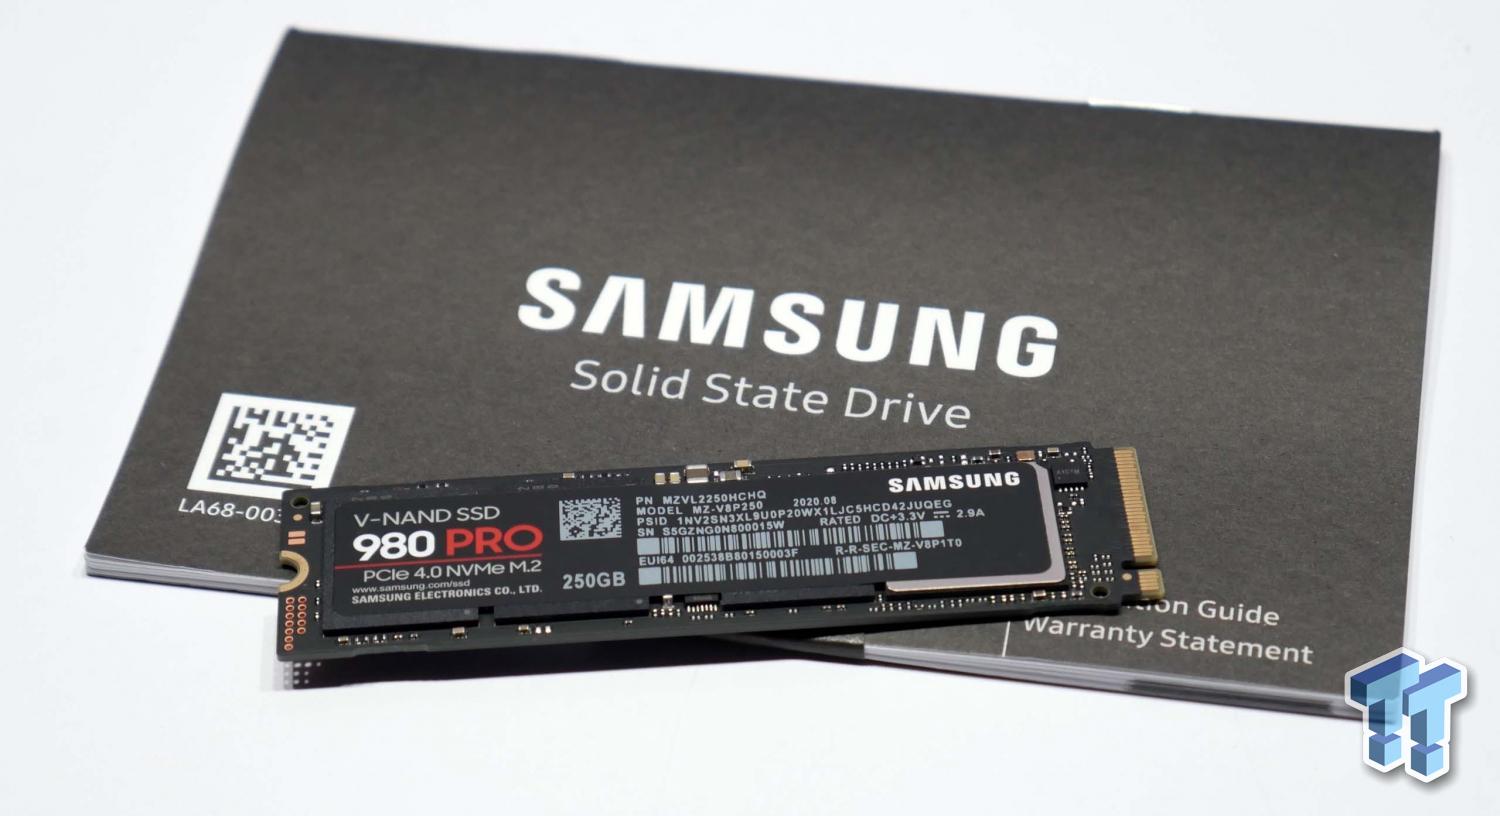 Samsung SSD 980 Review